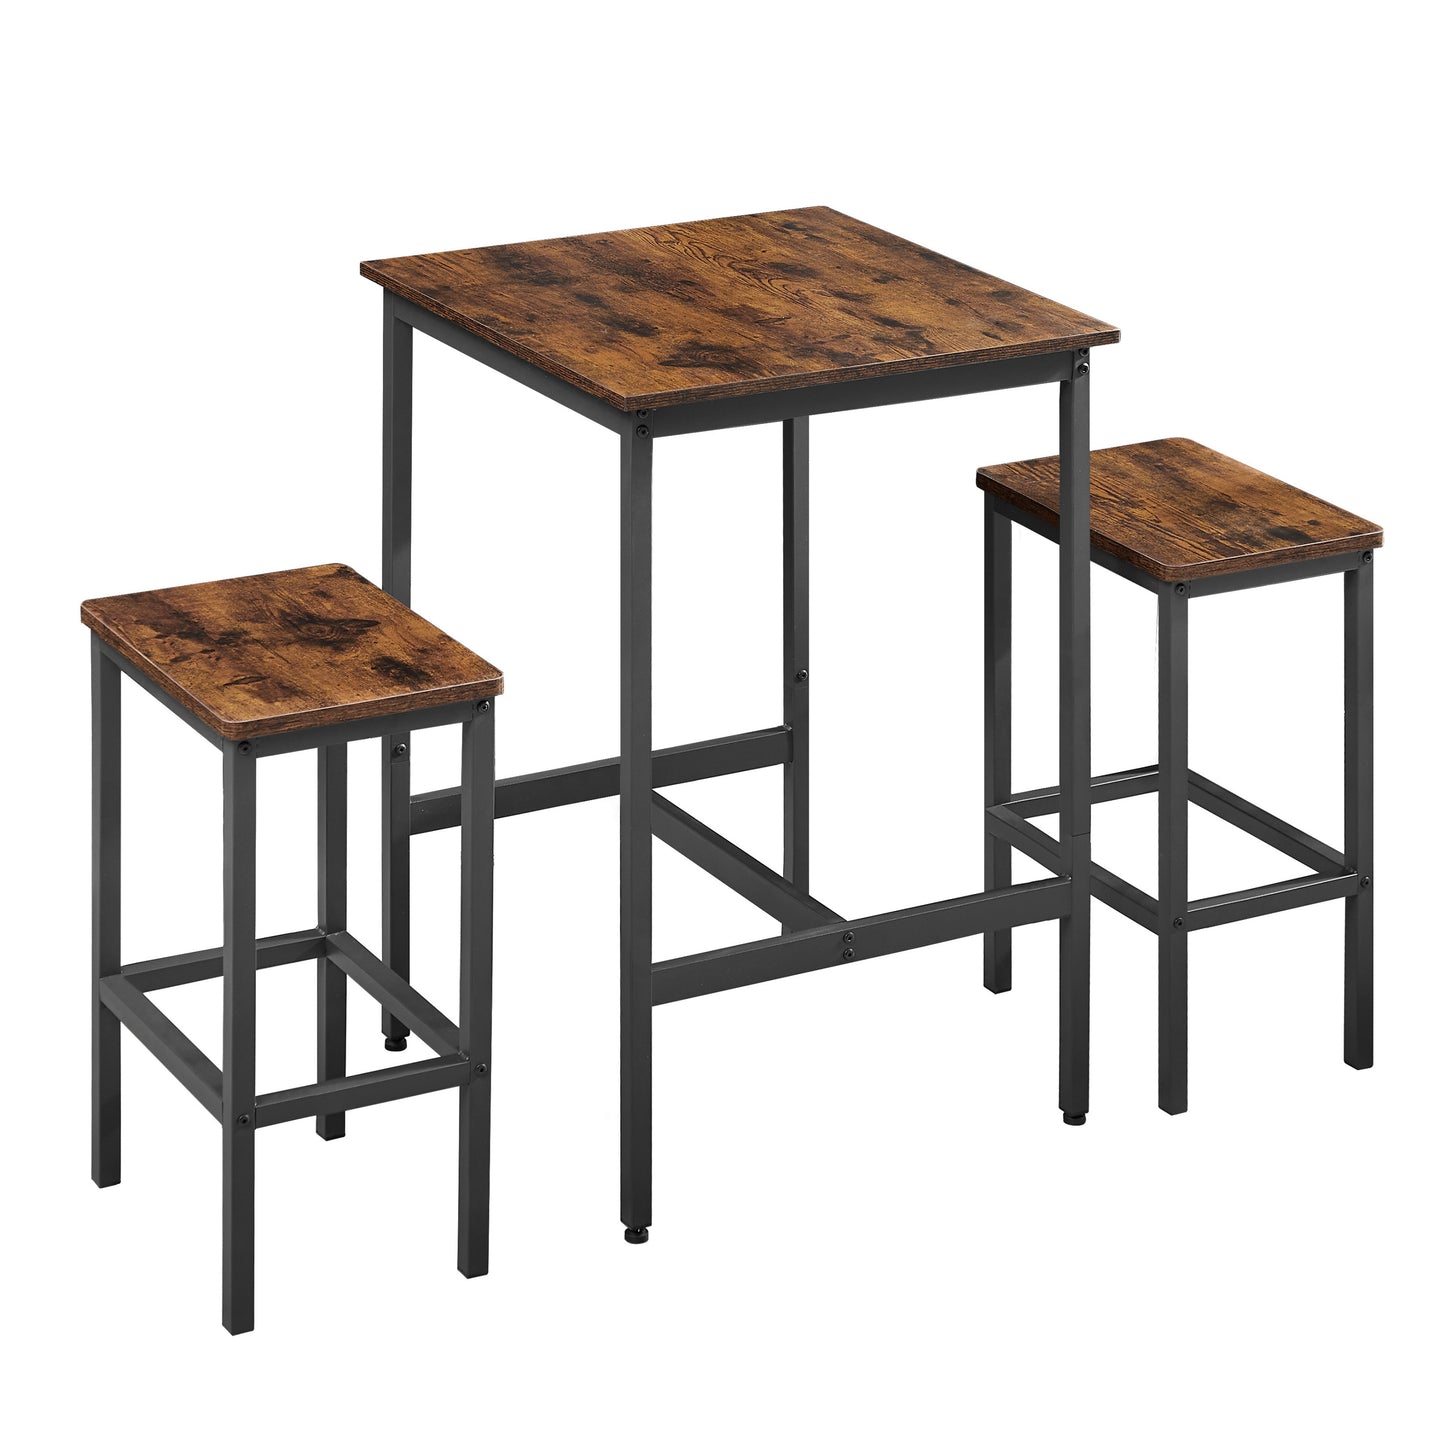 Jona Square Bar Table with 2 Bar Chairs